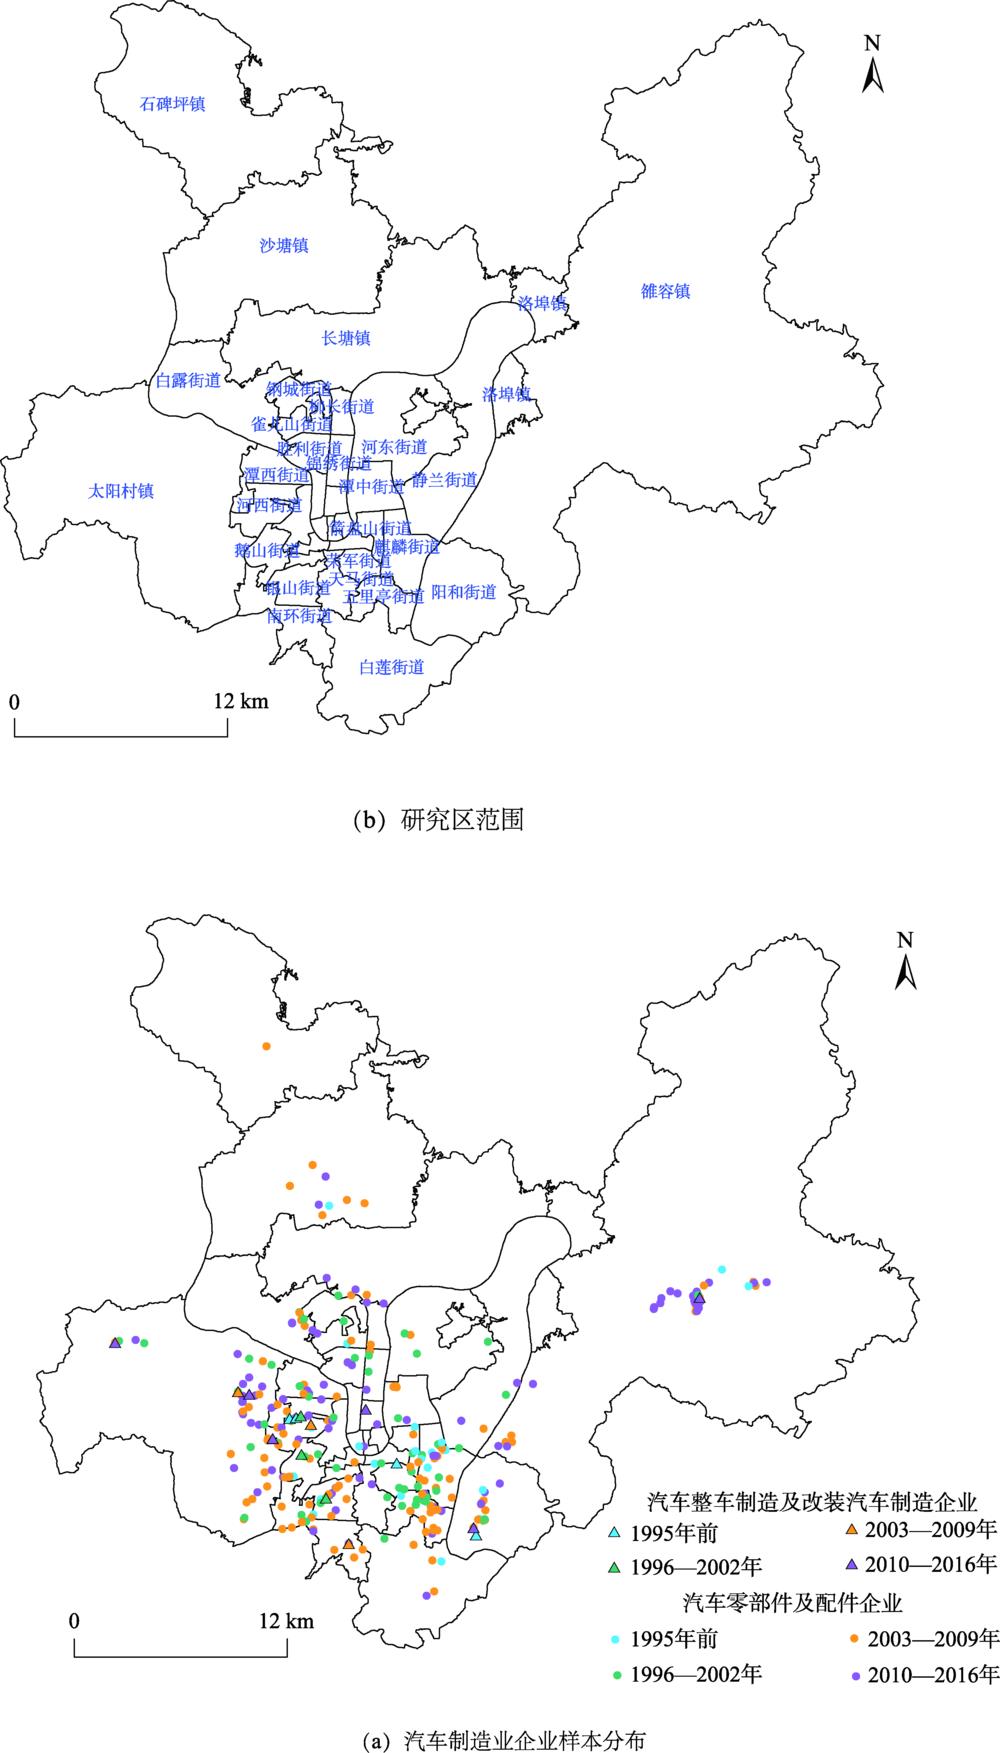 Research area and sample distribution of automotive manufacturing enterprises in Liuzhou